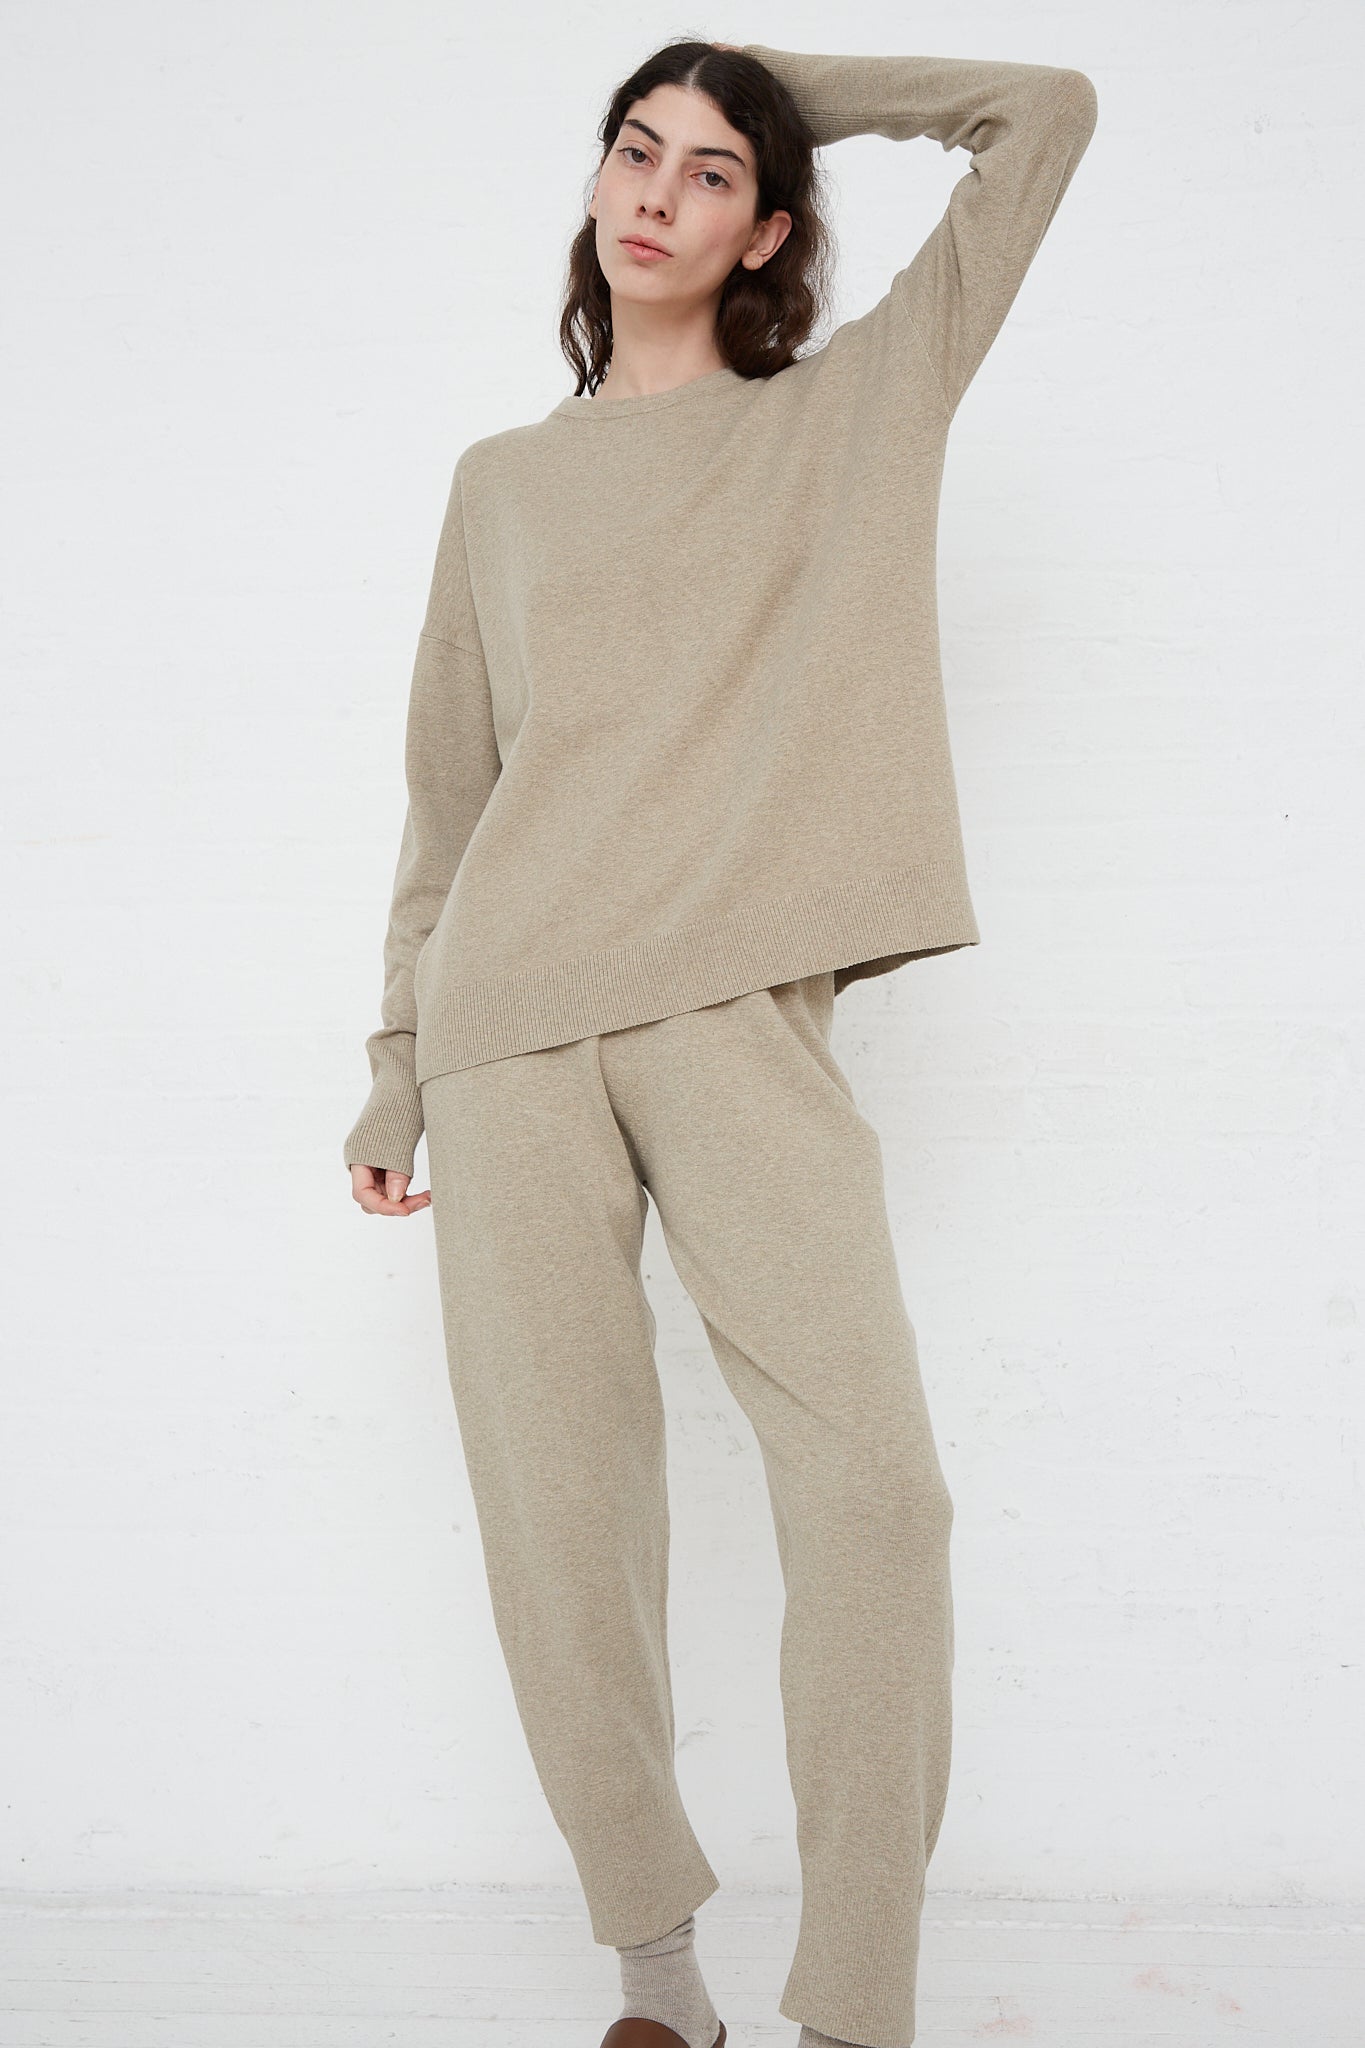 The model is wearing a beige sweater and relaxed fit joggers with an elasticated waist.Product: Lauren Manoogian's Base Pant in Stone Melange. Front view with model's left arm raised above head.